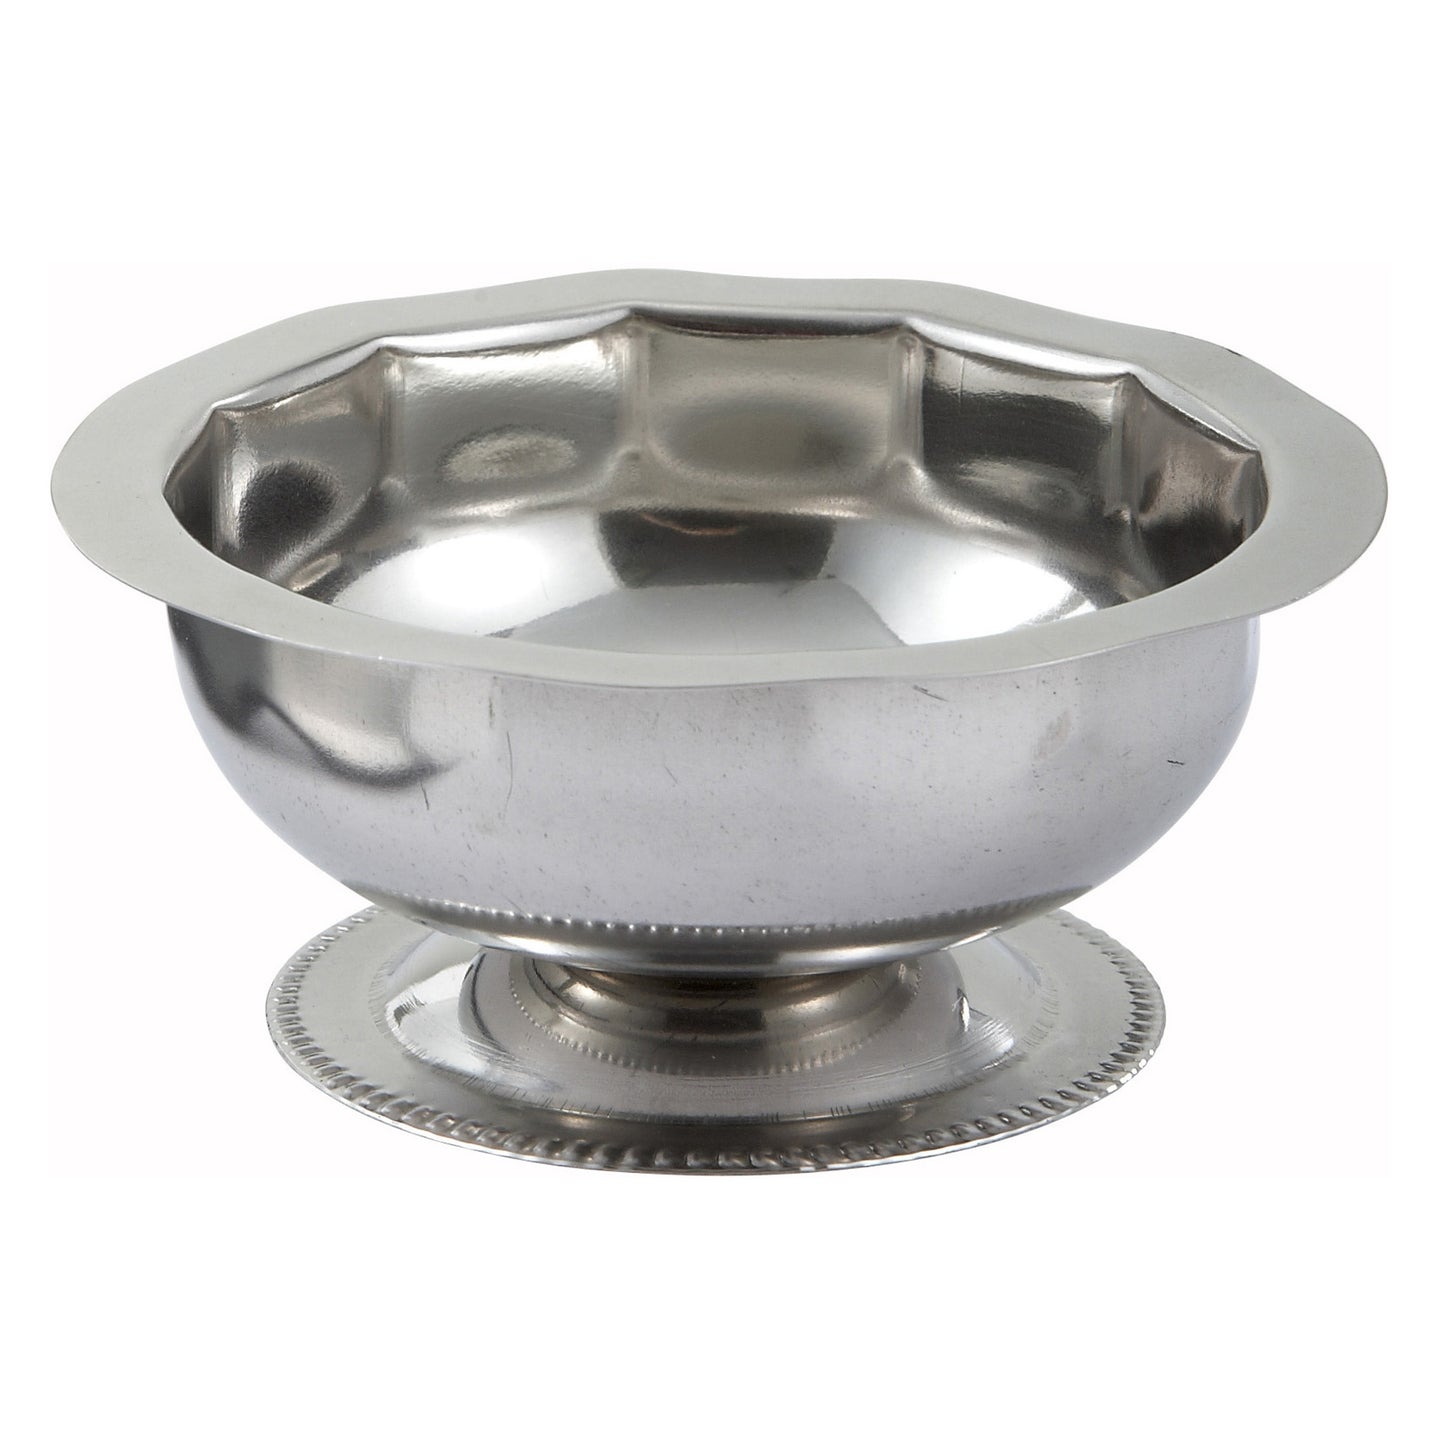 SD-5 - Sherbet Dish, 5 oz, Stainless Steel